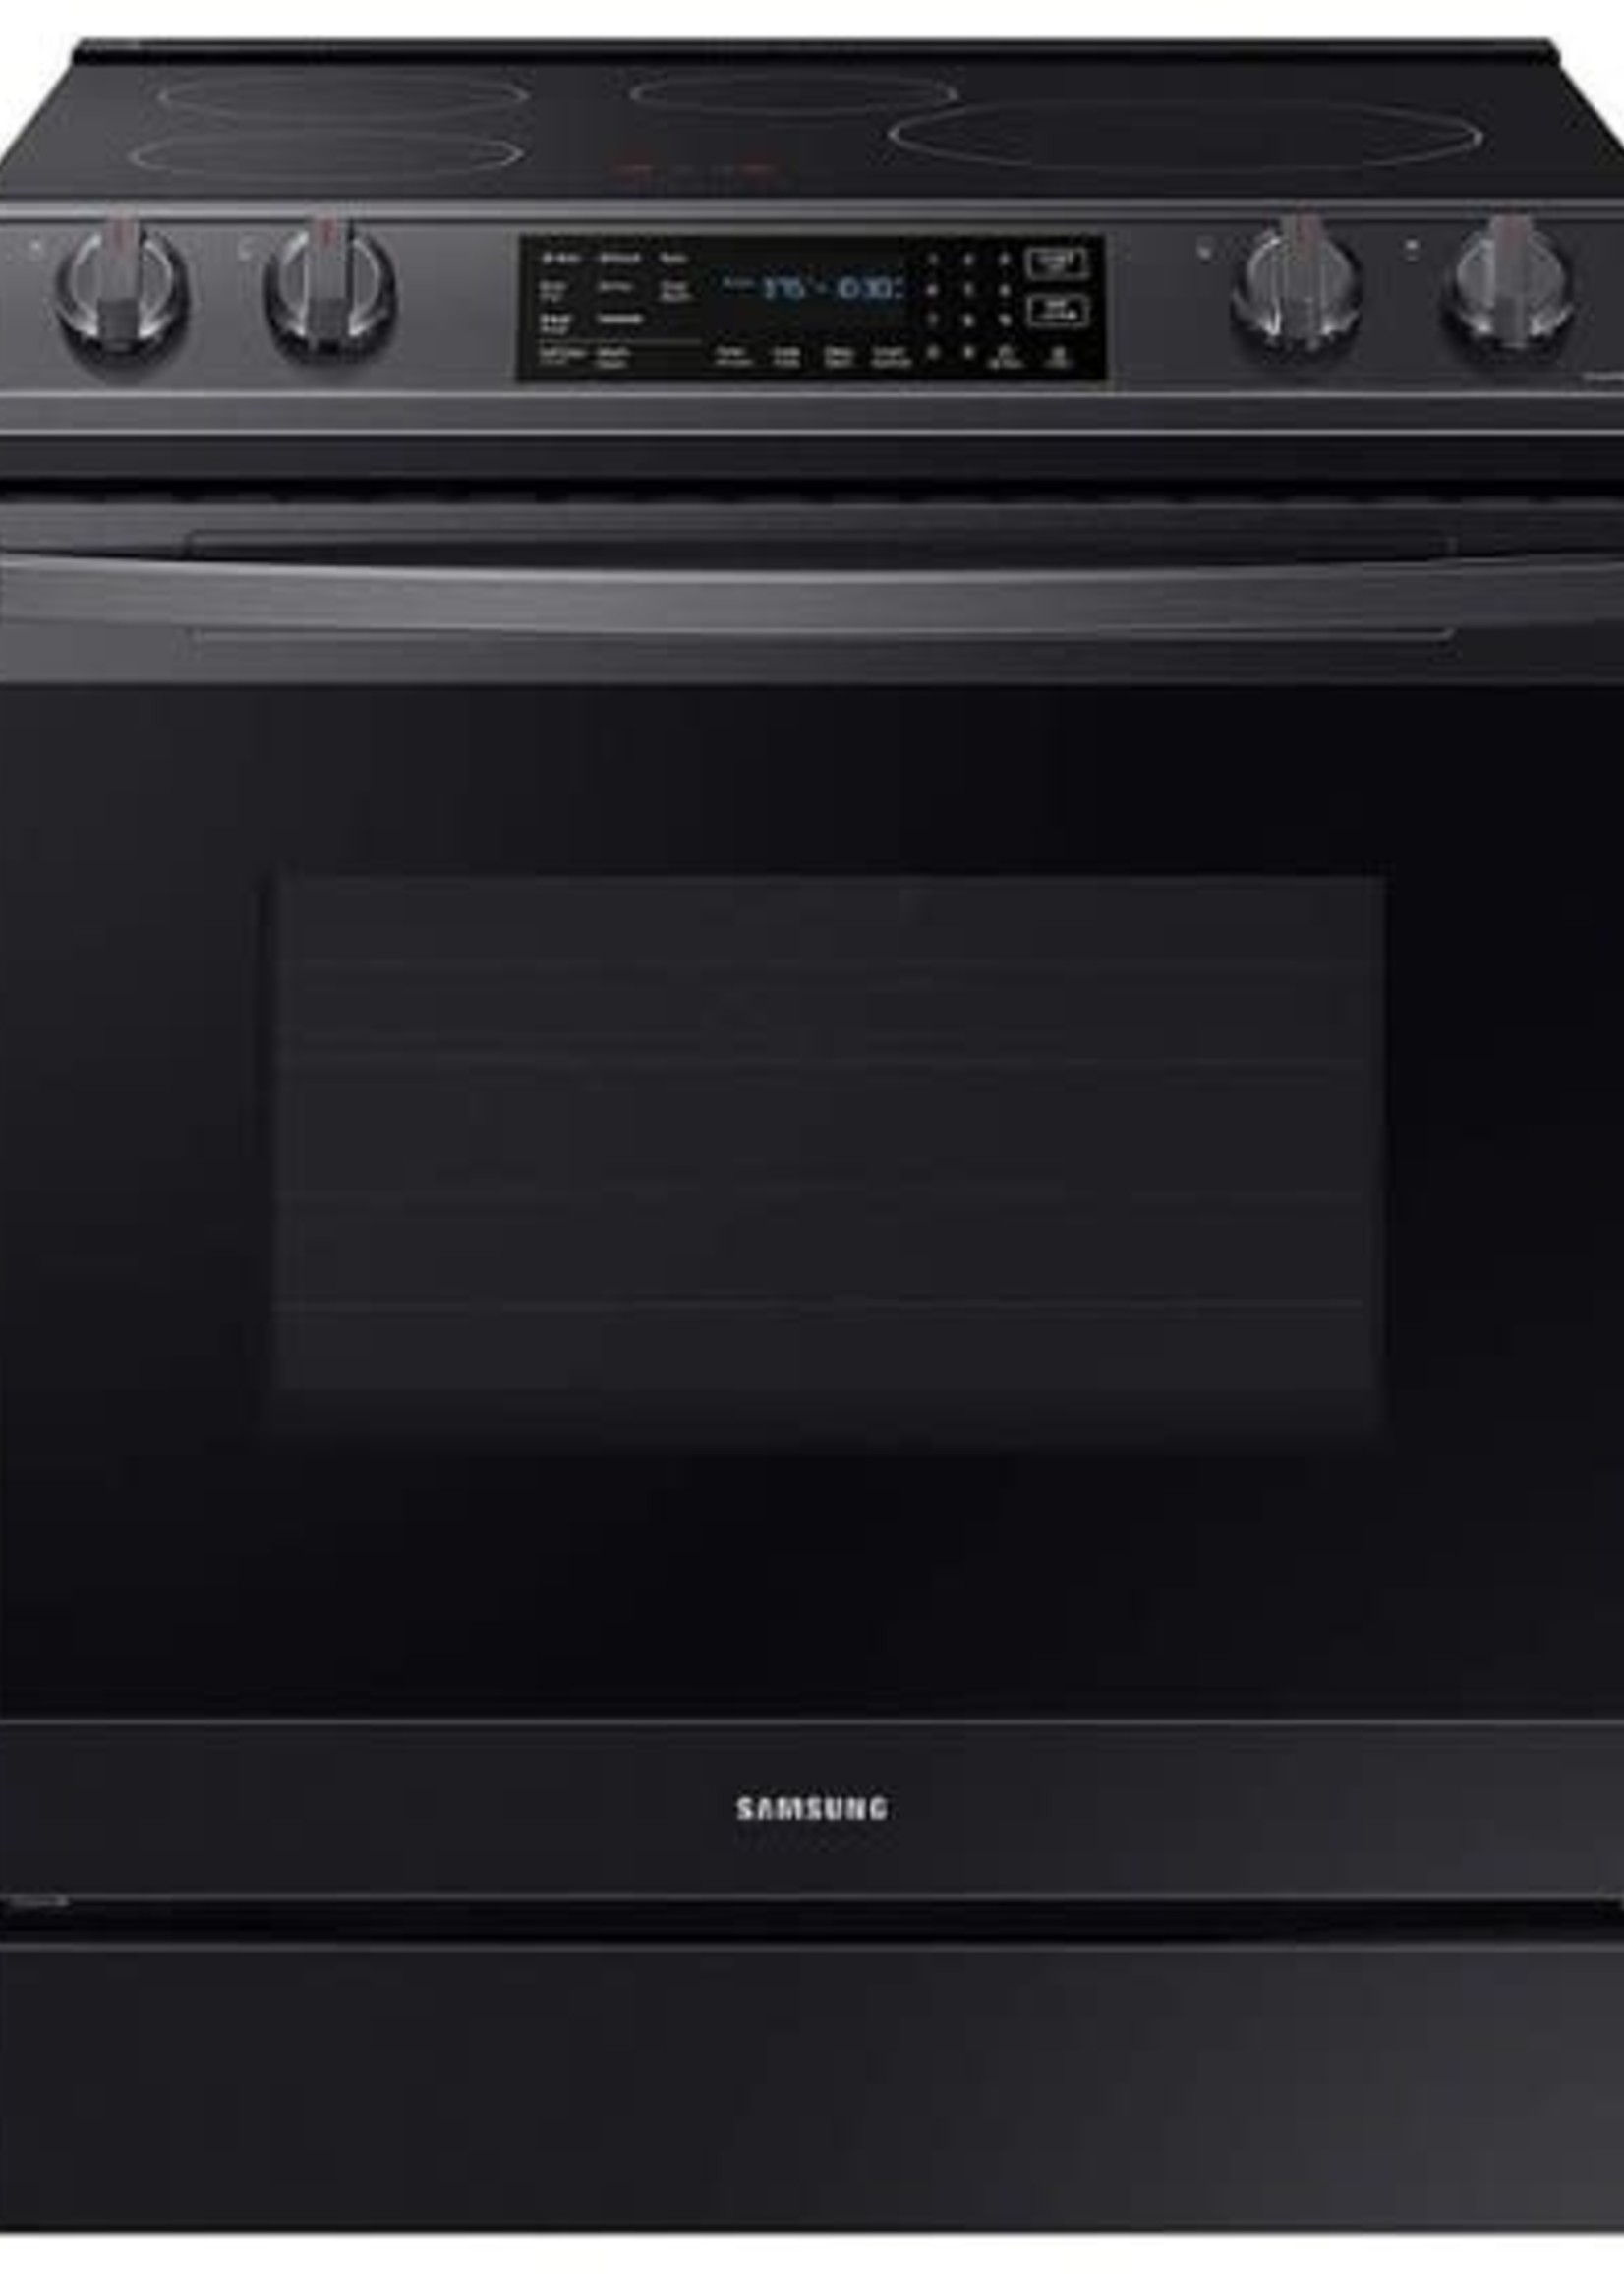 Samsung *Samsung  NE63B8611SG    6.3 cu. ft. Smart Instant Heat Slide-in Induction Range with Air Fry & Convection+ - Black Stainless steel